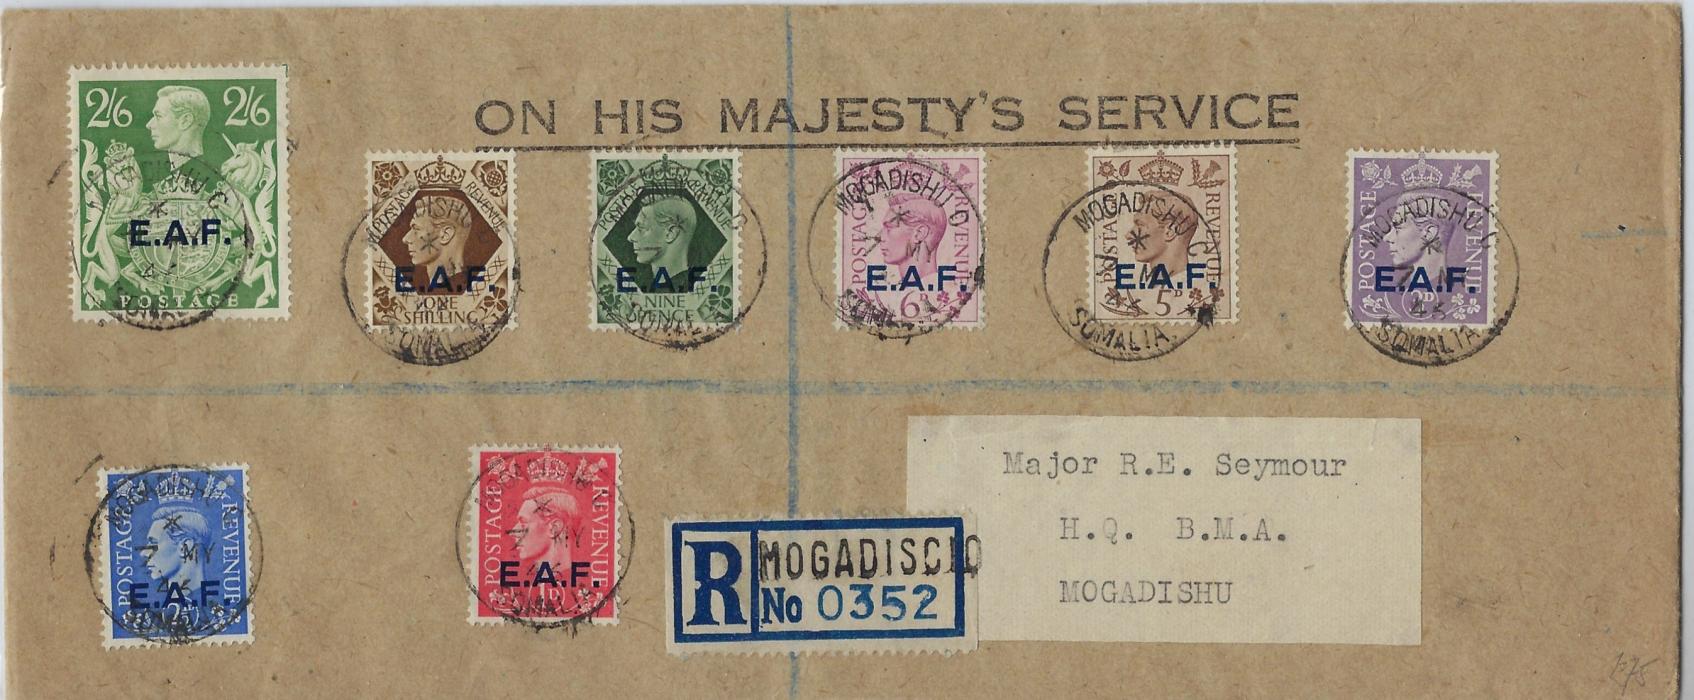 British Occupation Former Italian Colonies (Somalia) 1946 (7 MY) registered OHMS cover bearing E.A.F. overprinted set less 2d., each stamp tied Mogadishu cds; fine condition.